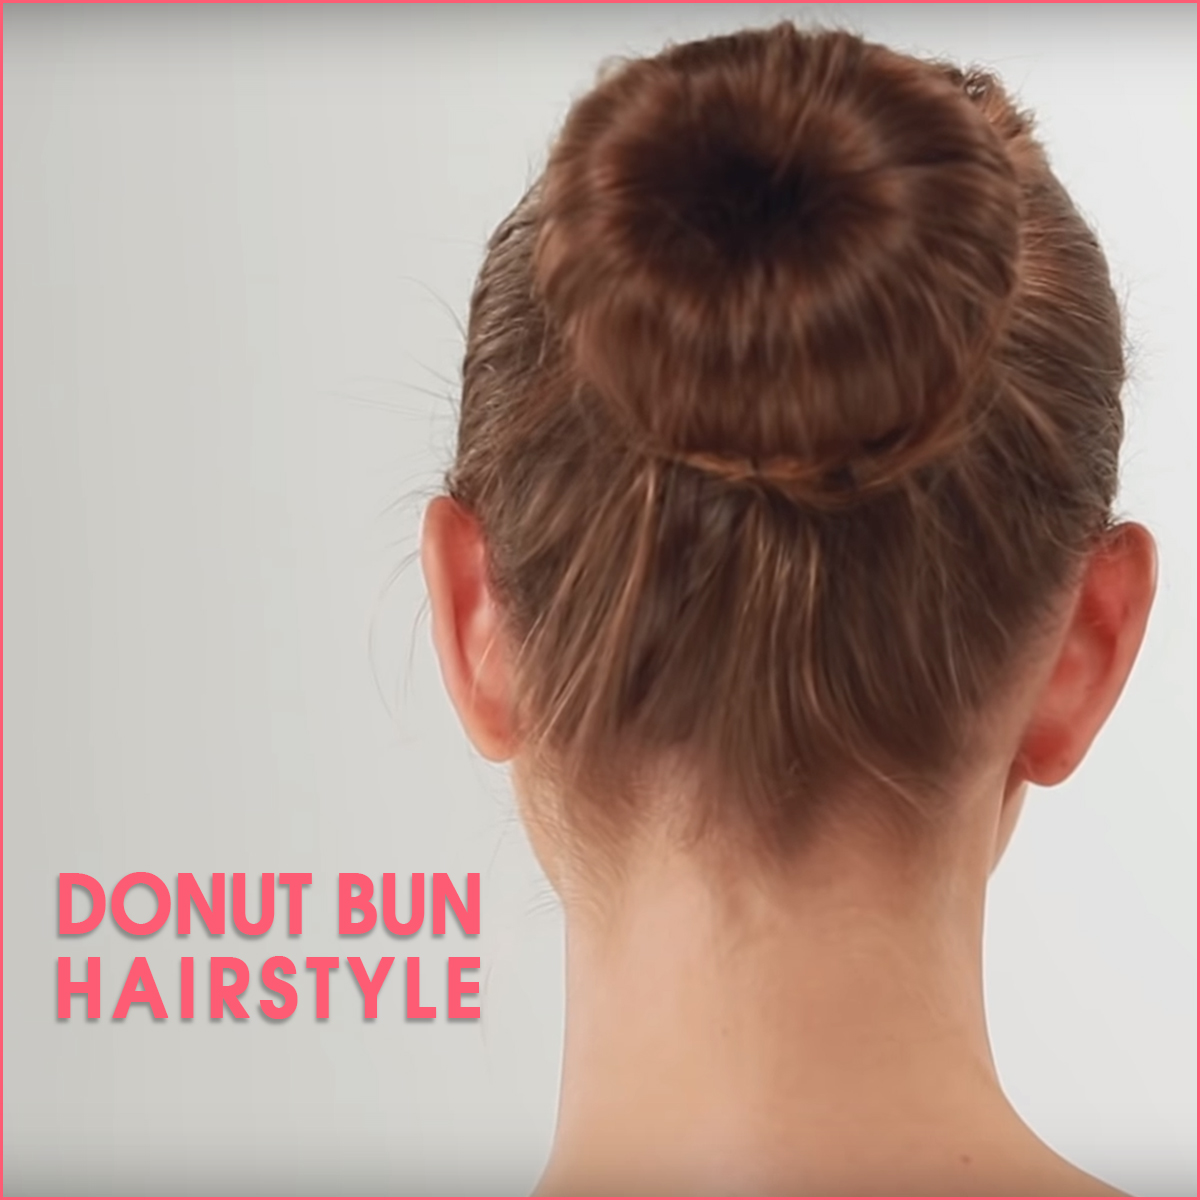 Easy Bun Hairstyle With Donut | Quick Hairstyle For Party - YouTube